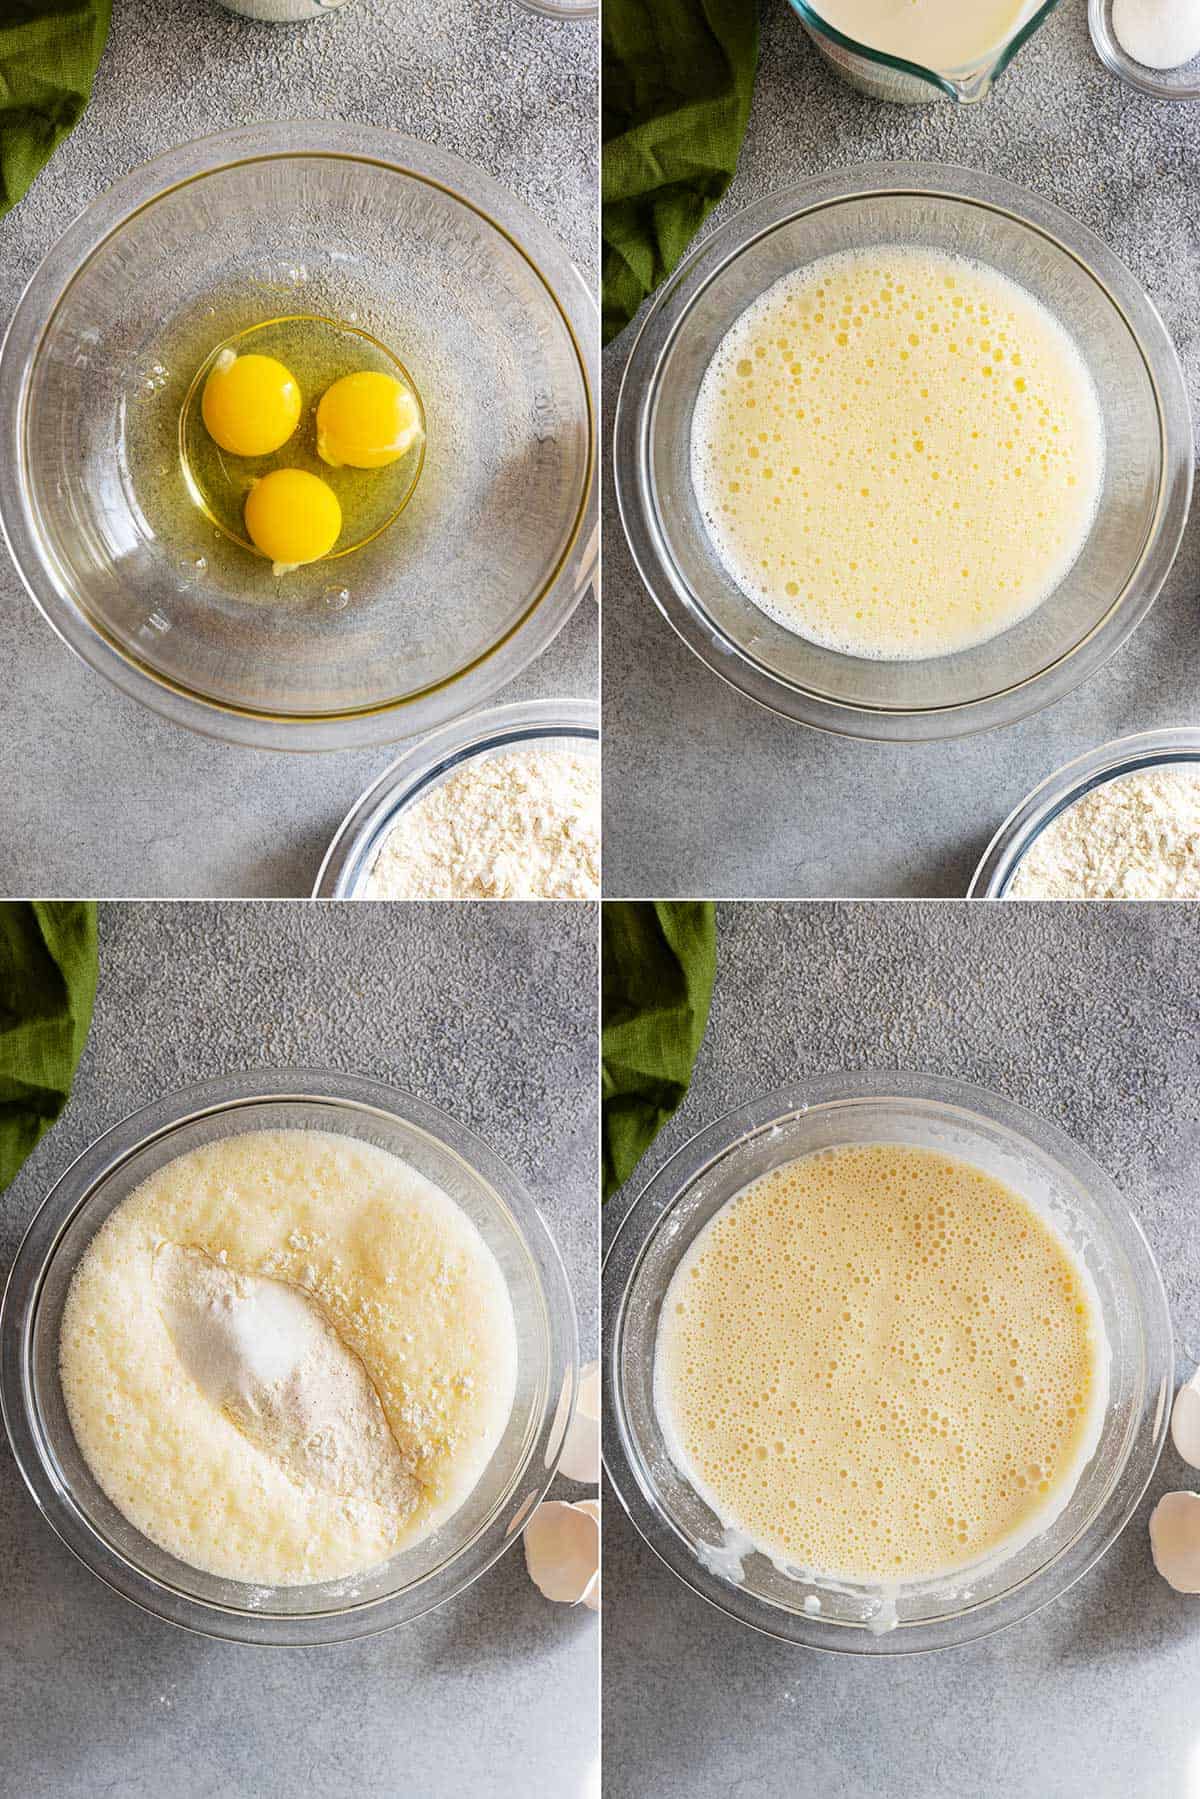 Four pictures showing how to mix up the batter and what it should look like when finished. Thinner than American pancake batter but not quite as thin as crepe batter. 